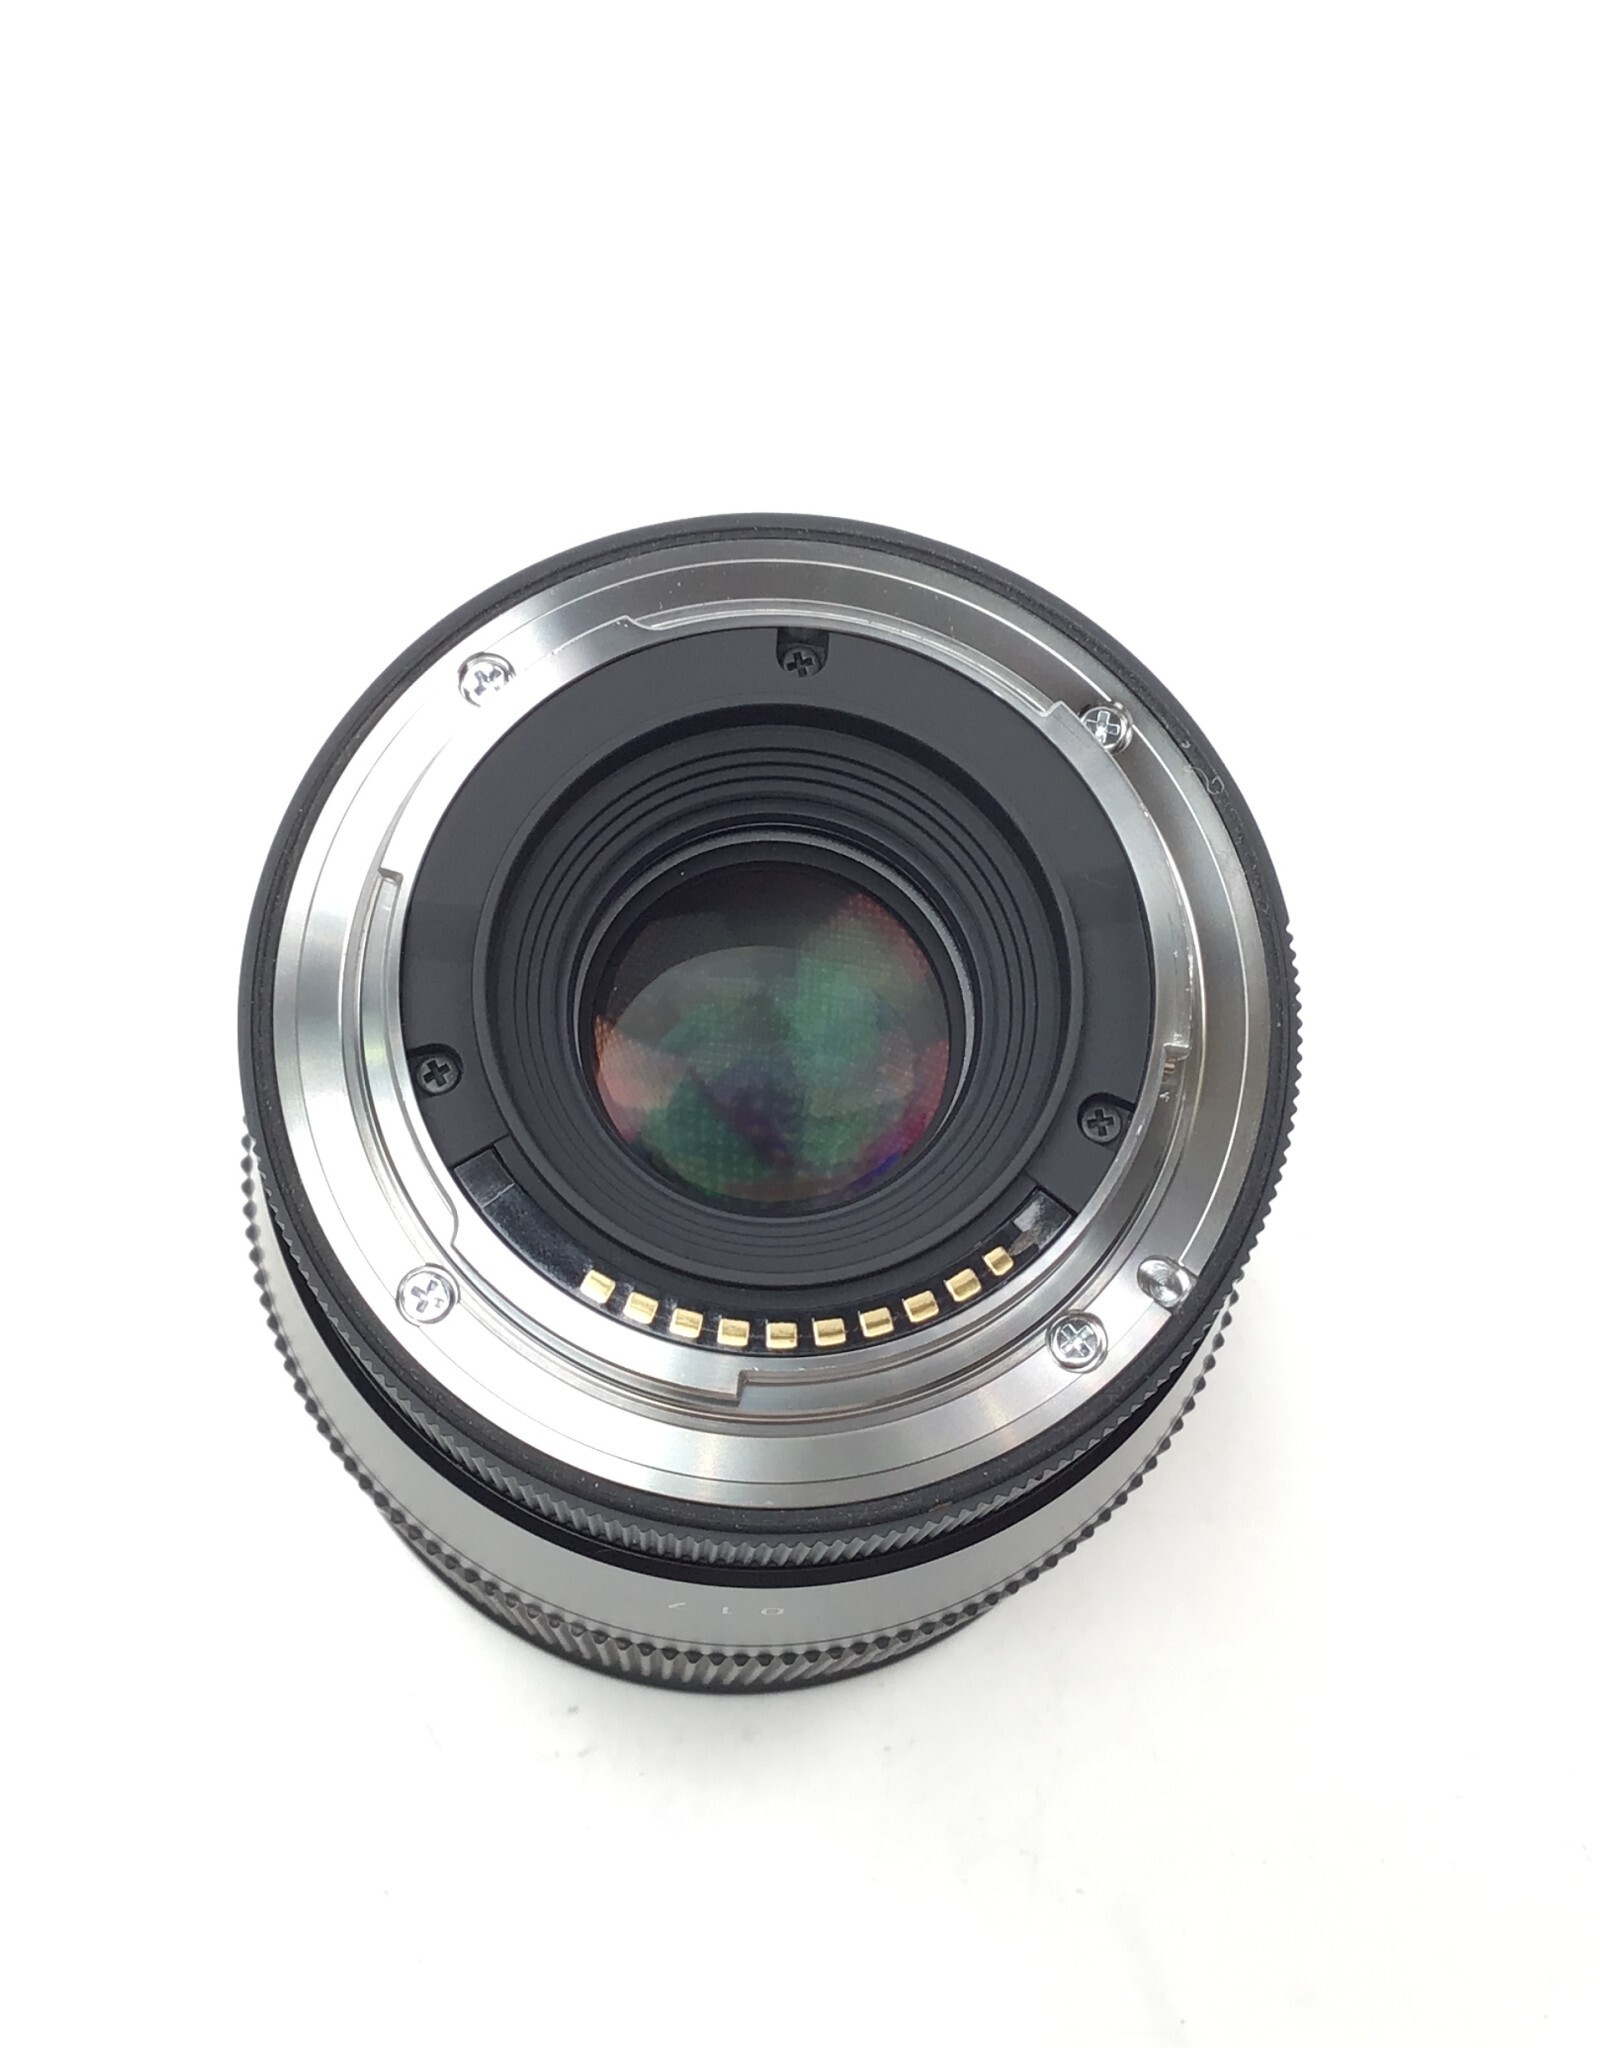 SIGMA Sigma Art 16mm f1.4 DC DN Lens for Sony Used Good